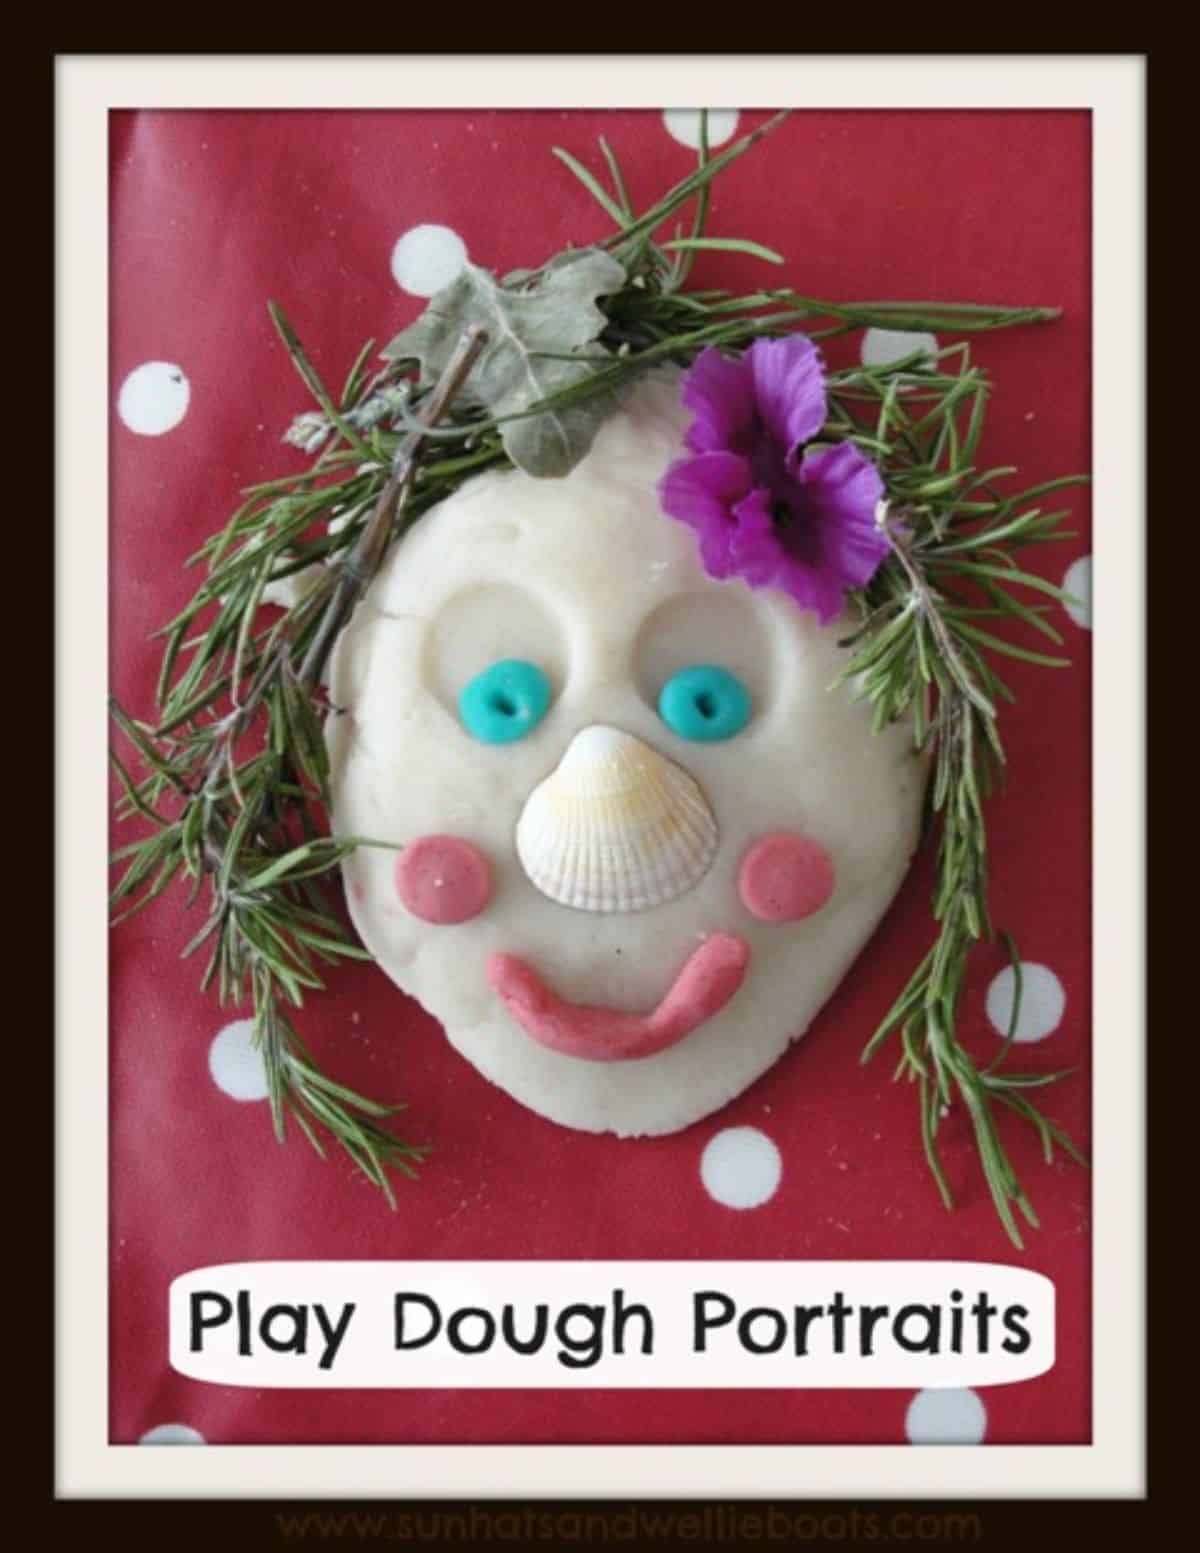 Playdough portrait made from different components.